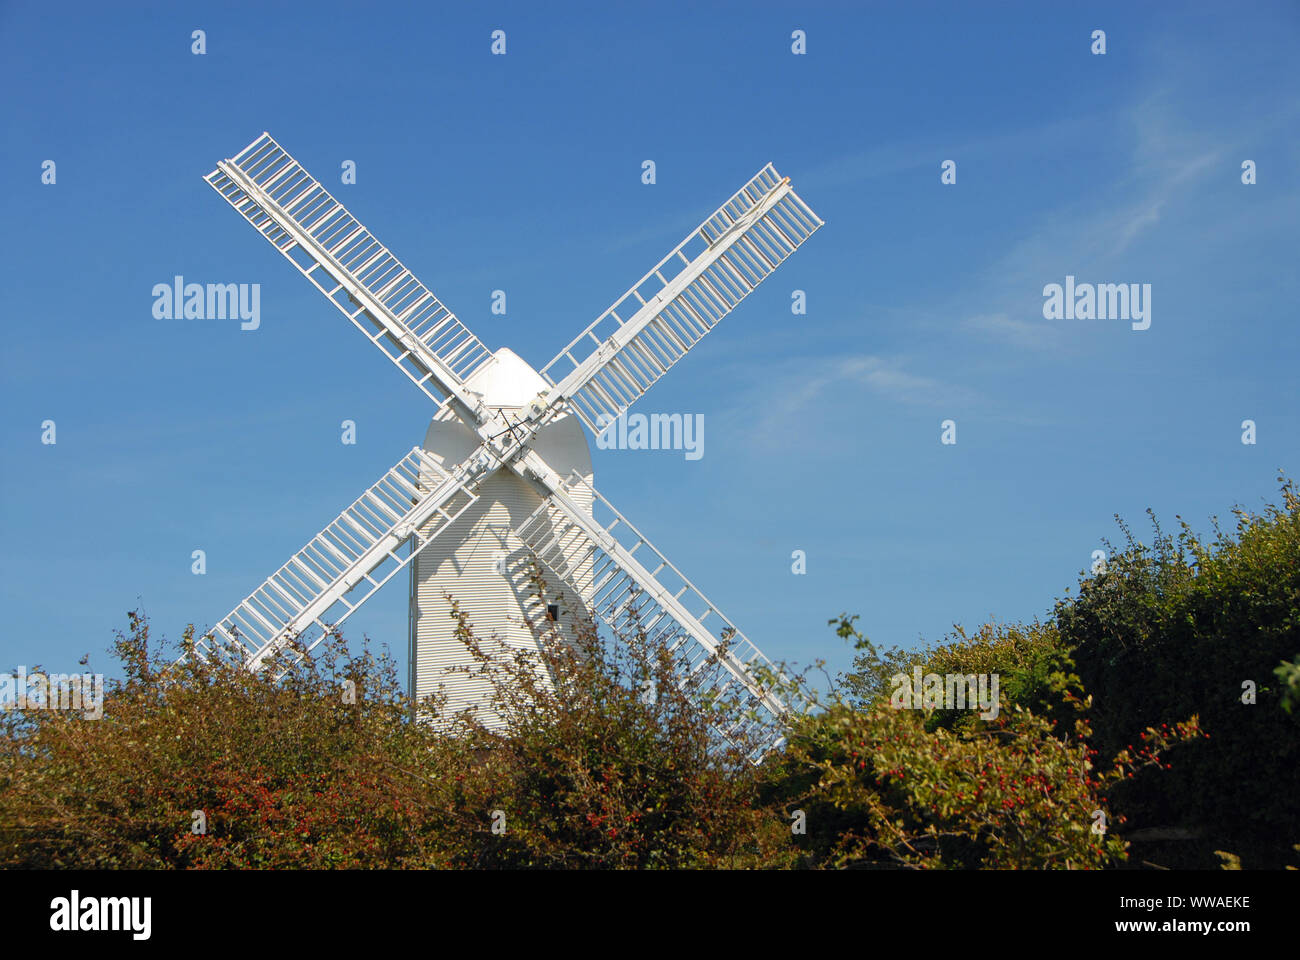 Jill Windmill, one of the Jack and Jill Windmills also known as the Clayton Windmills on the South Downs Way in West Sussex near Brighton, England UK. Stock Photo